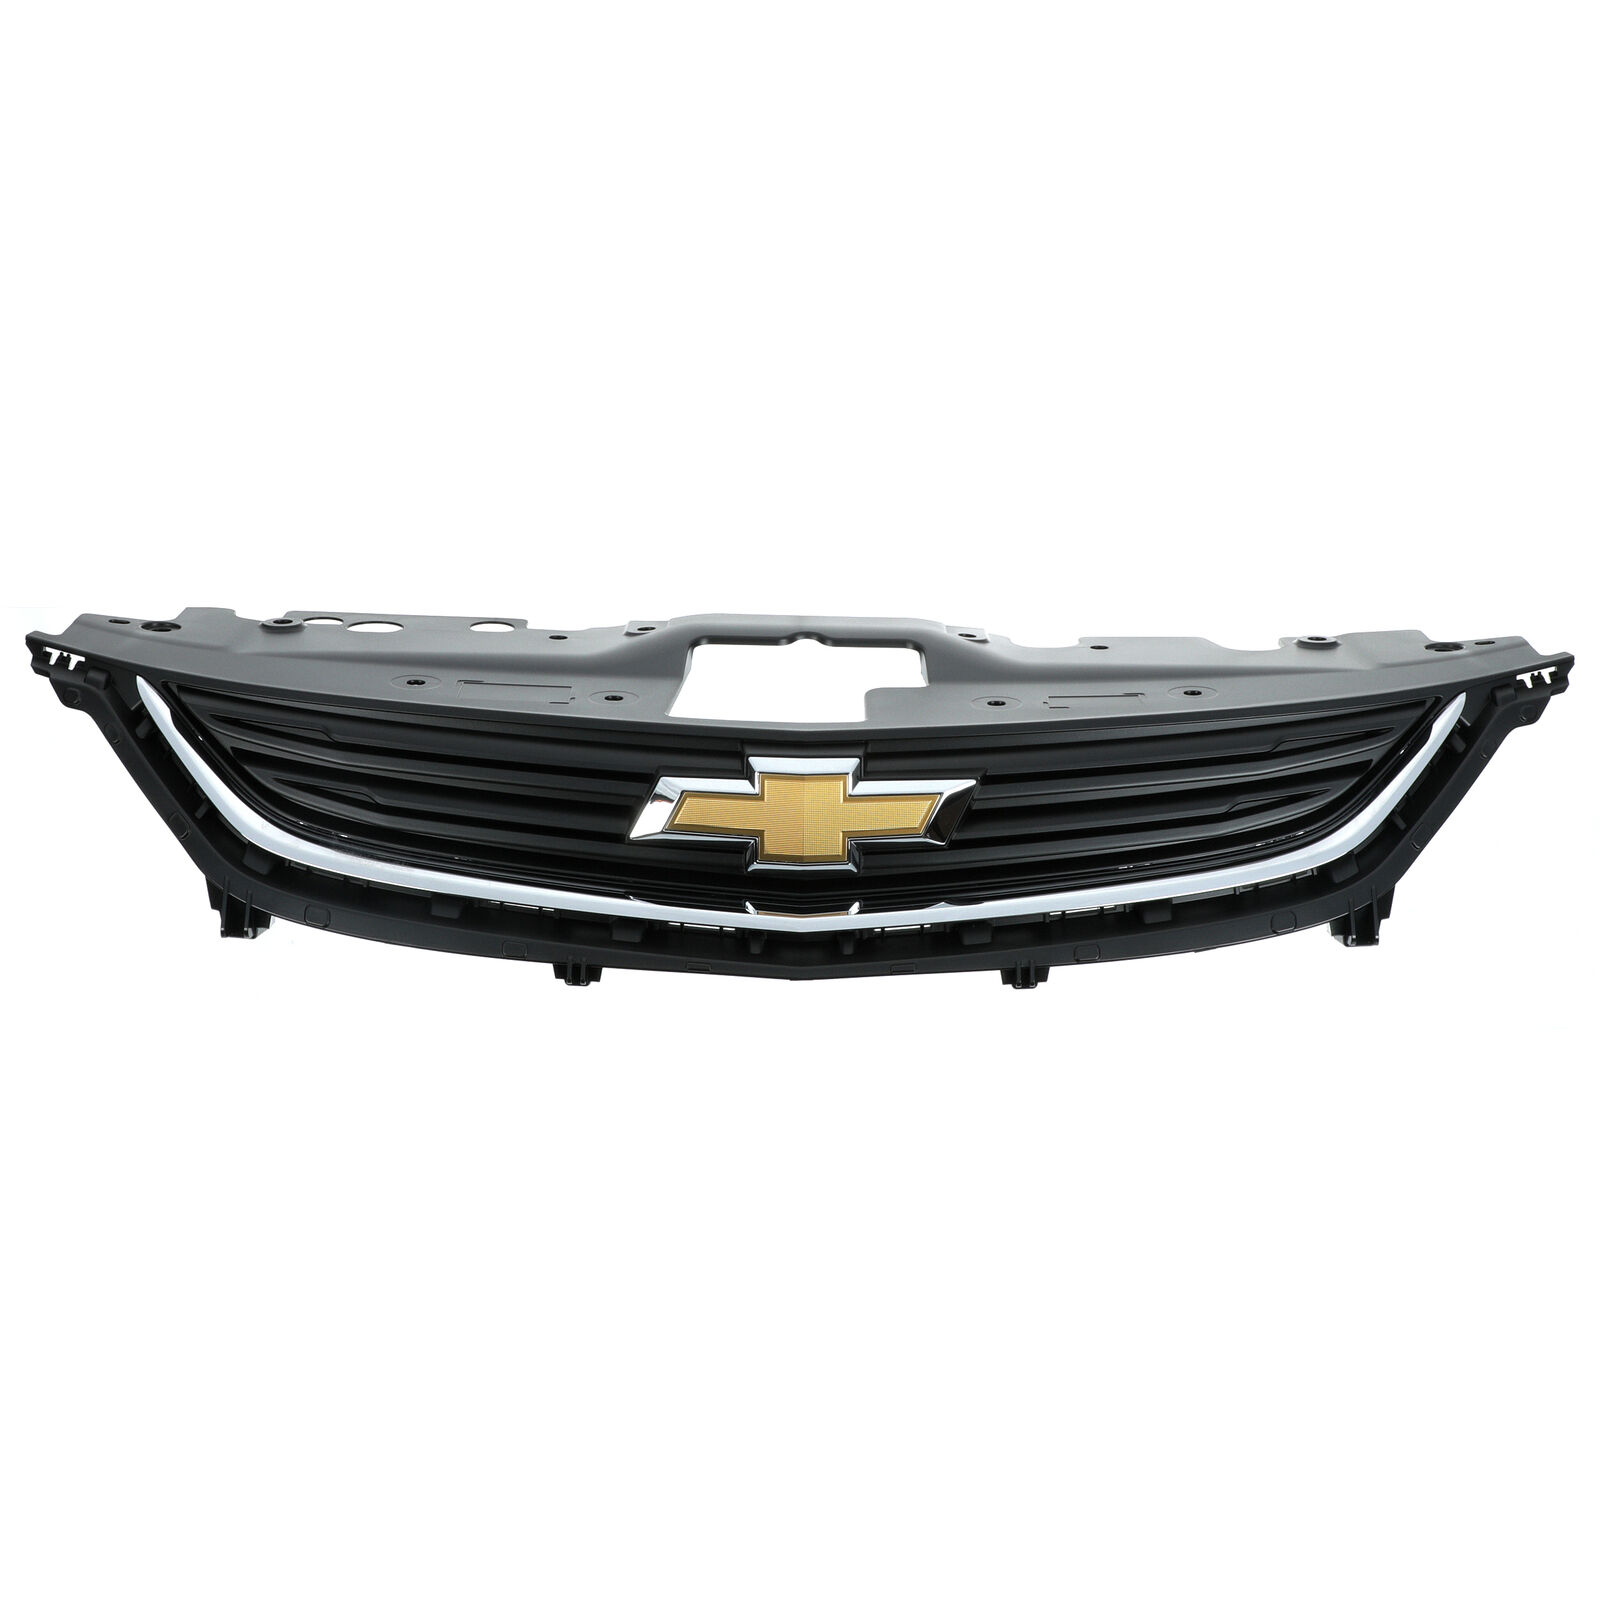 OEM NEW 2017-2020 Chevrolet Sonic Front Bumper Upper Grille Assembly 94538130